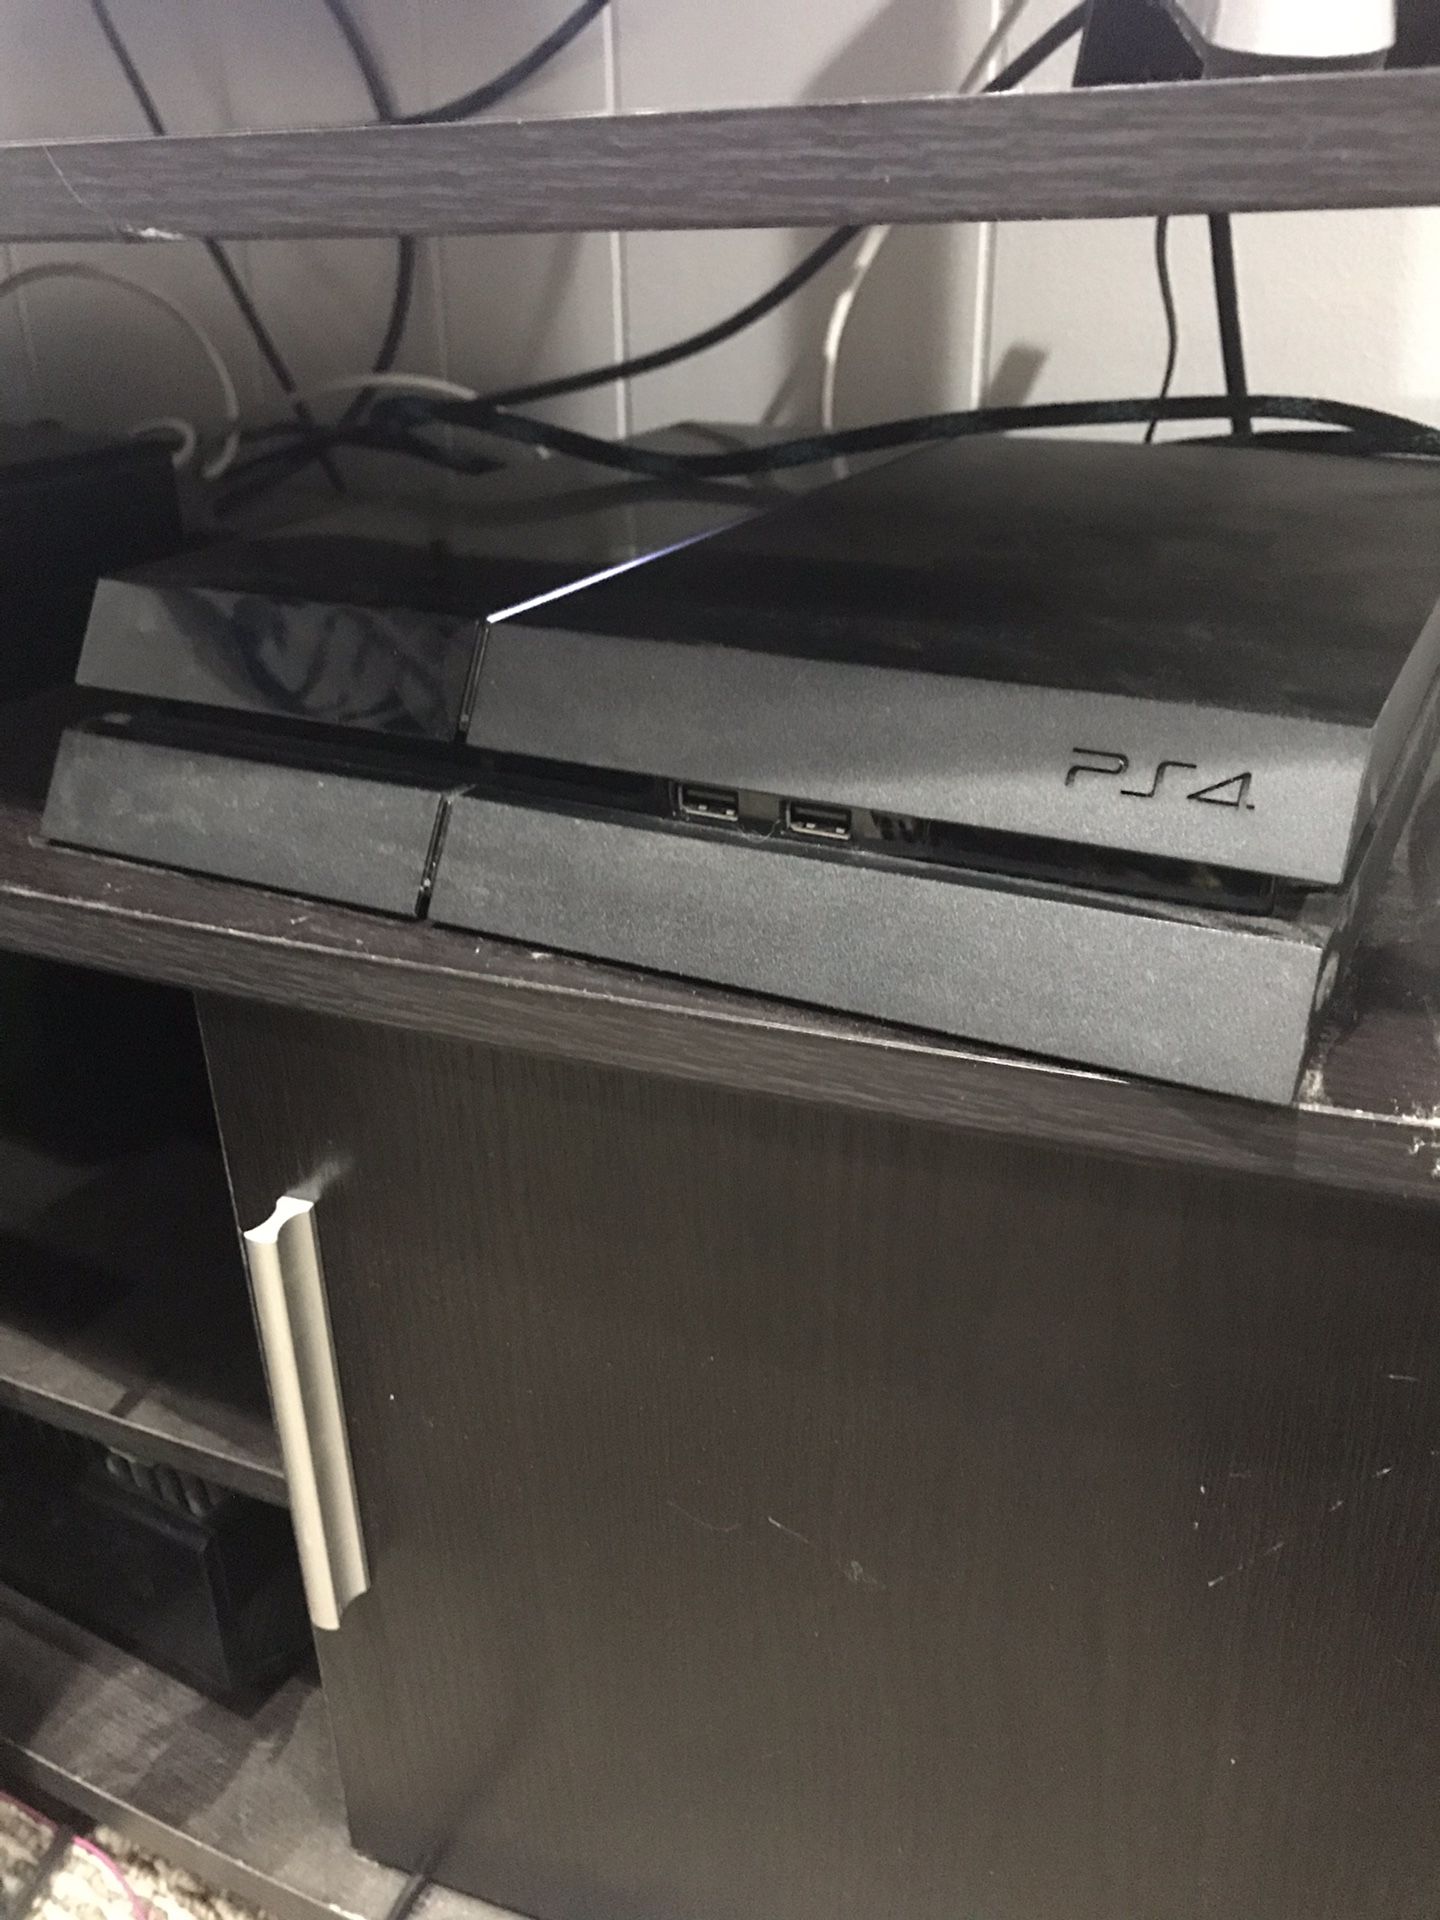 PS4 w/ controllers + games (Spider-Man)